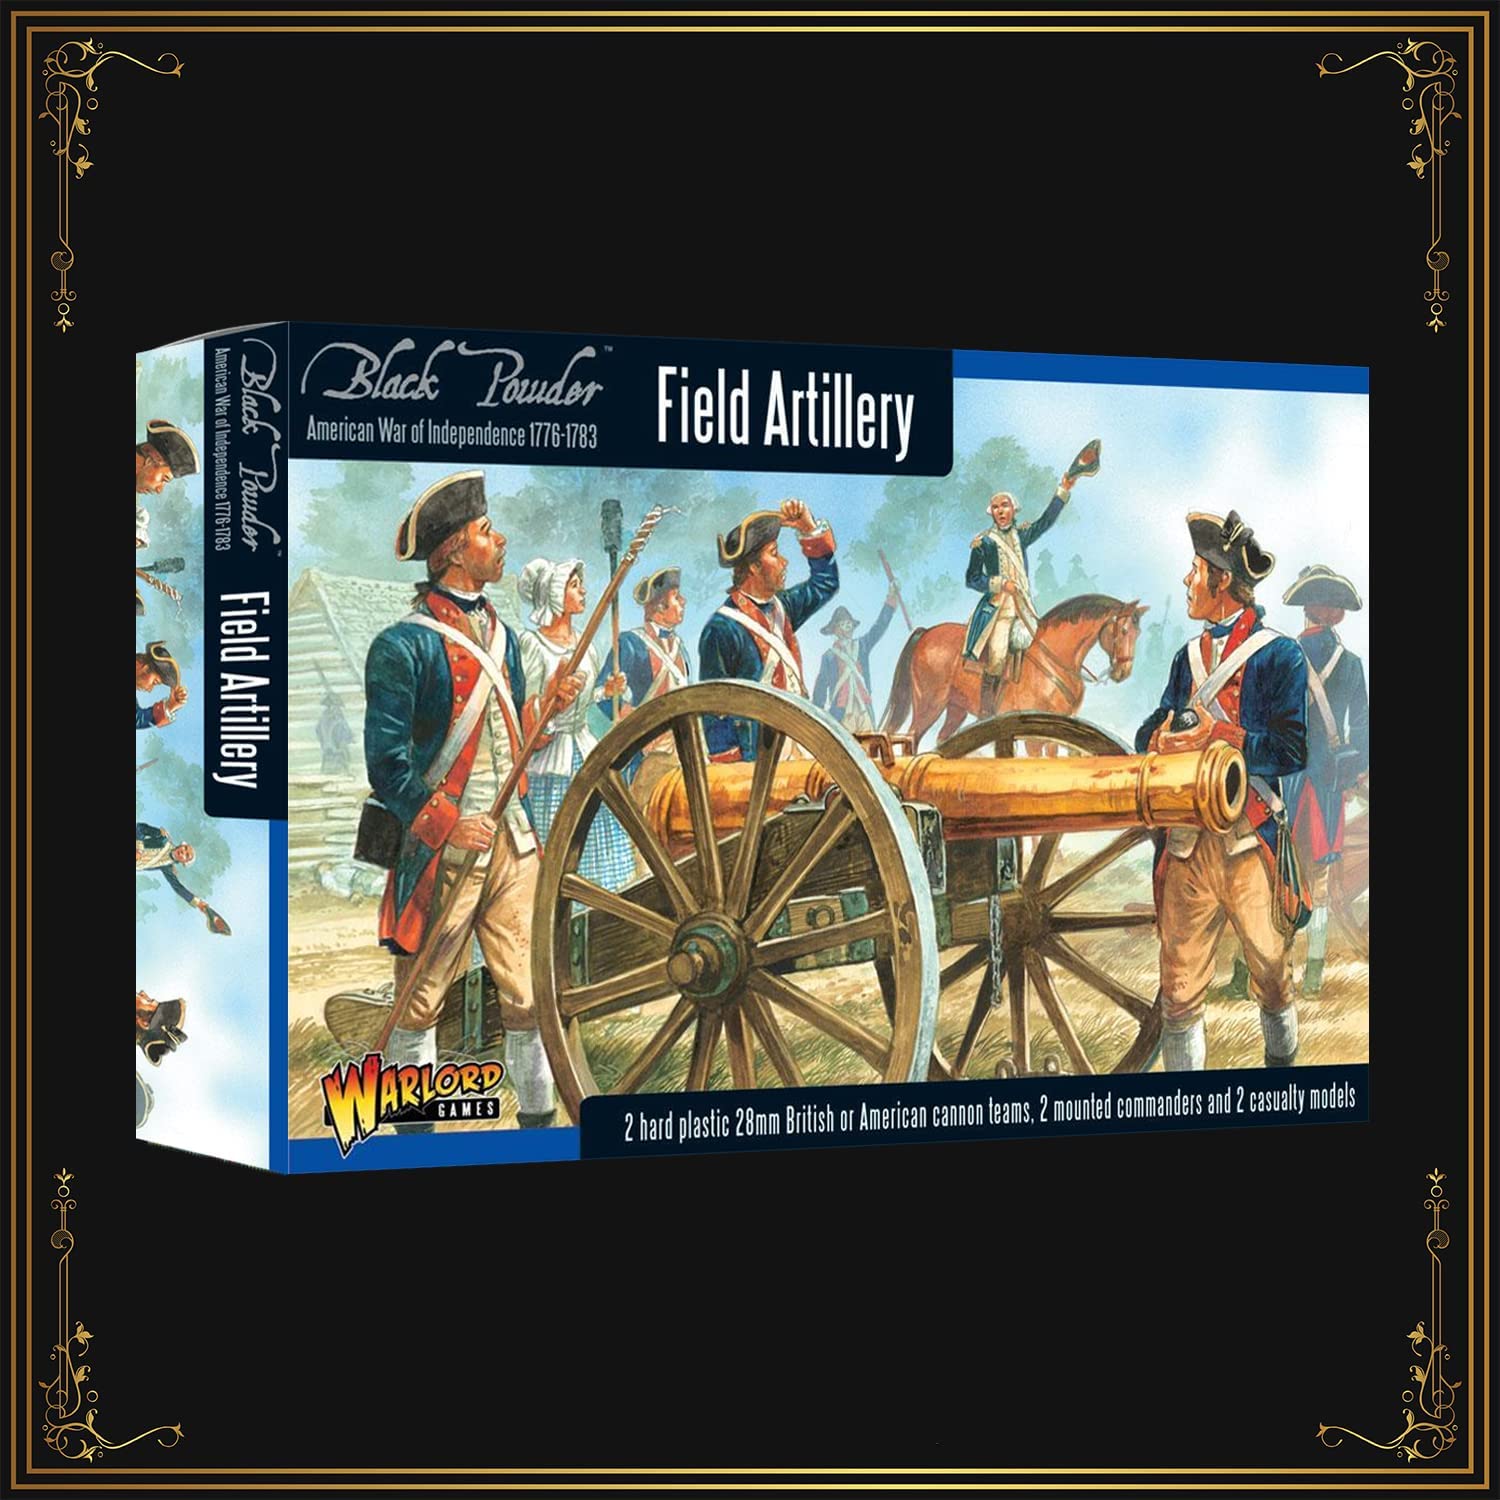 Black Powder - American War of Independence: Field Artillery and Army Commanders